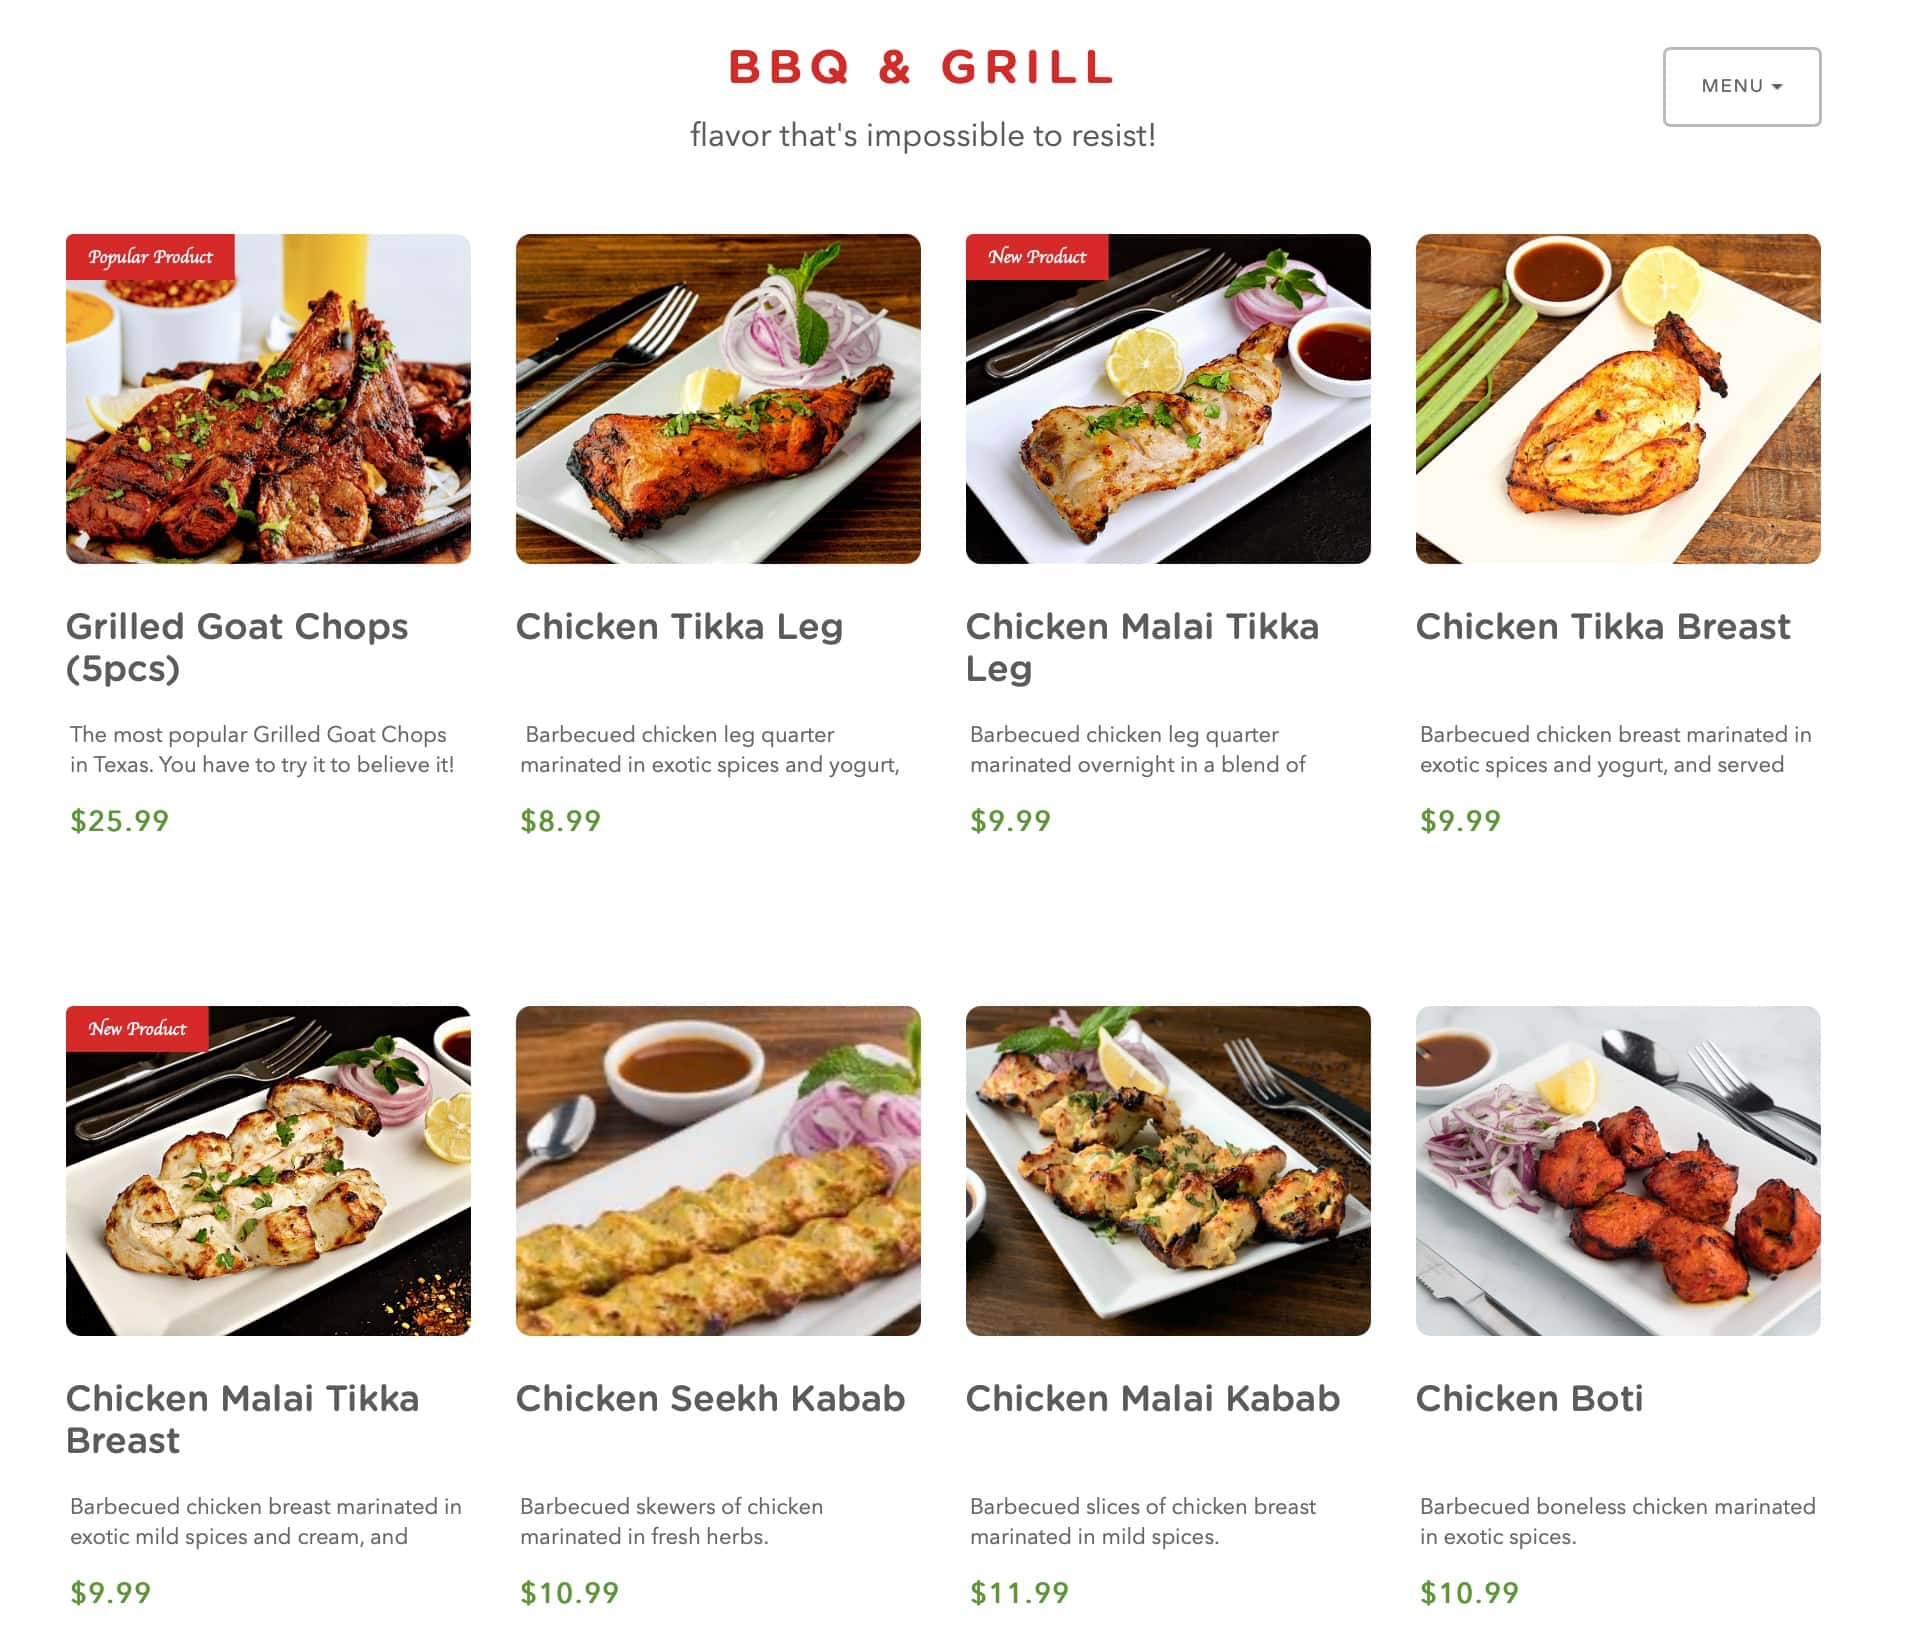 Aga's Restaurant and Catering BBQ and Grill Menu